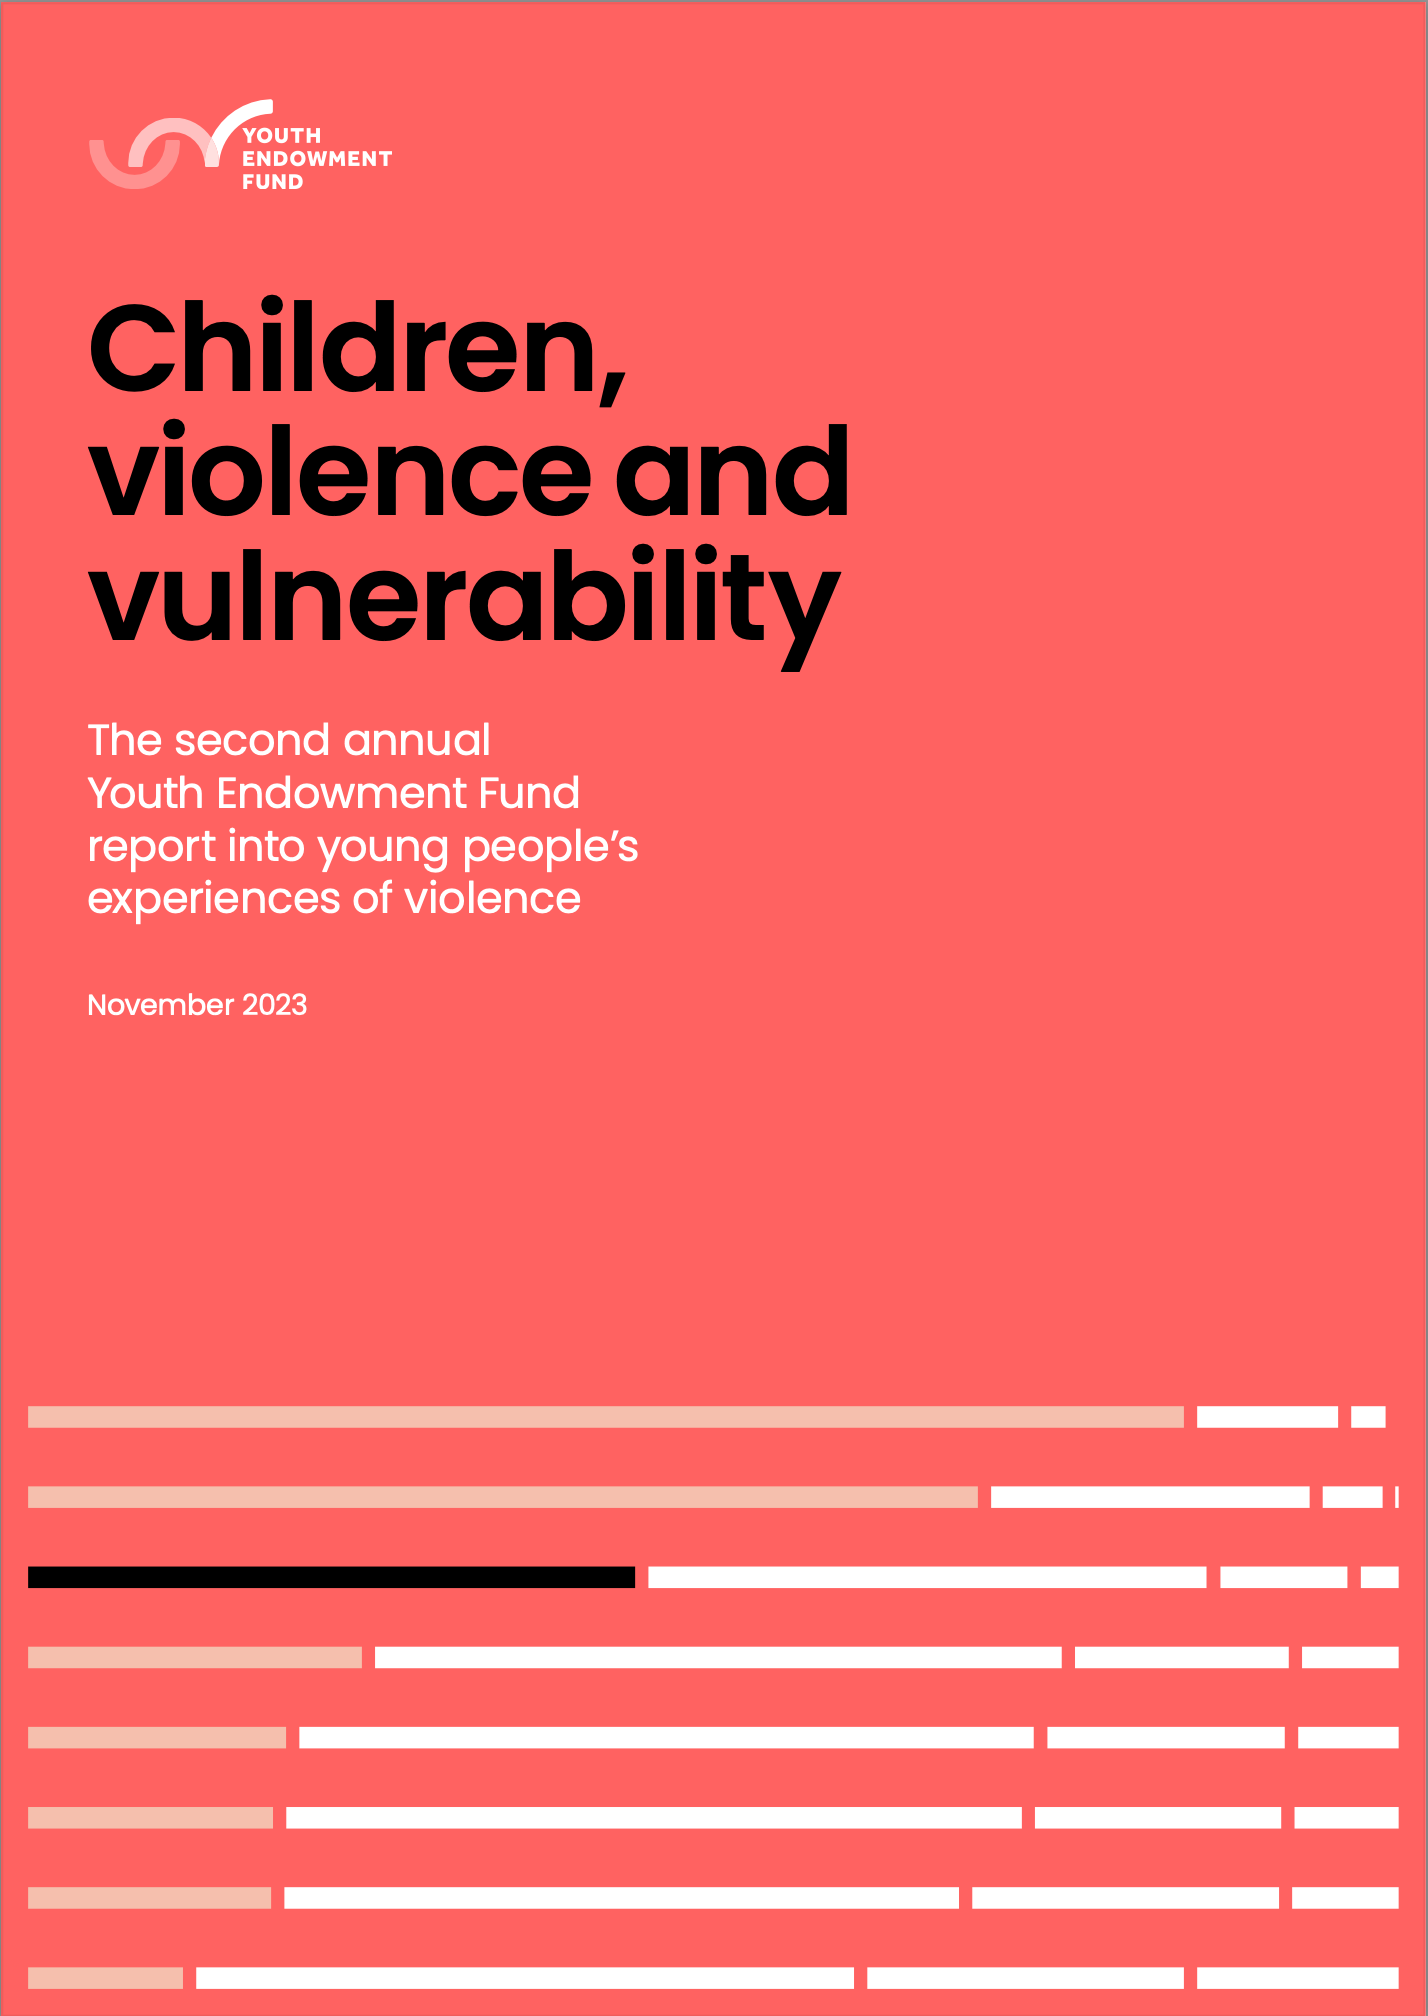 Front cover of the 2023 Children, violence and vulnerability report